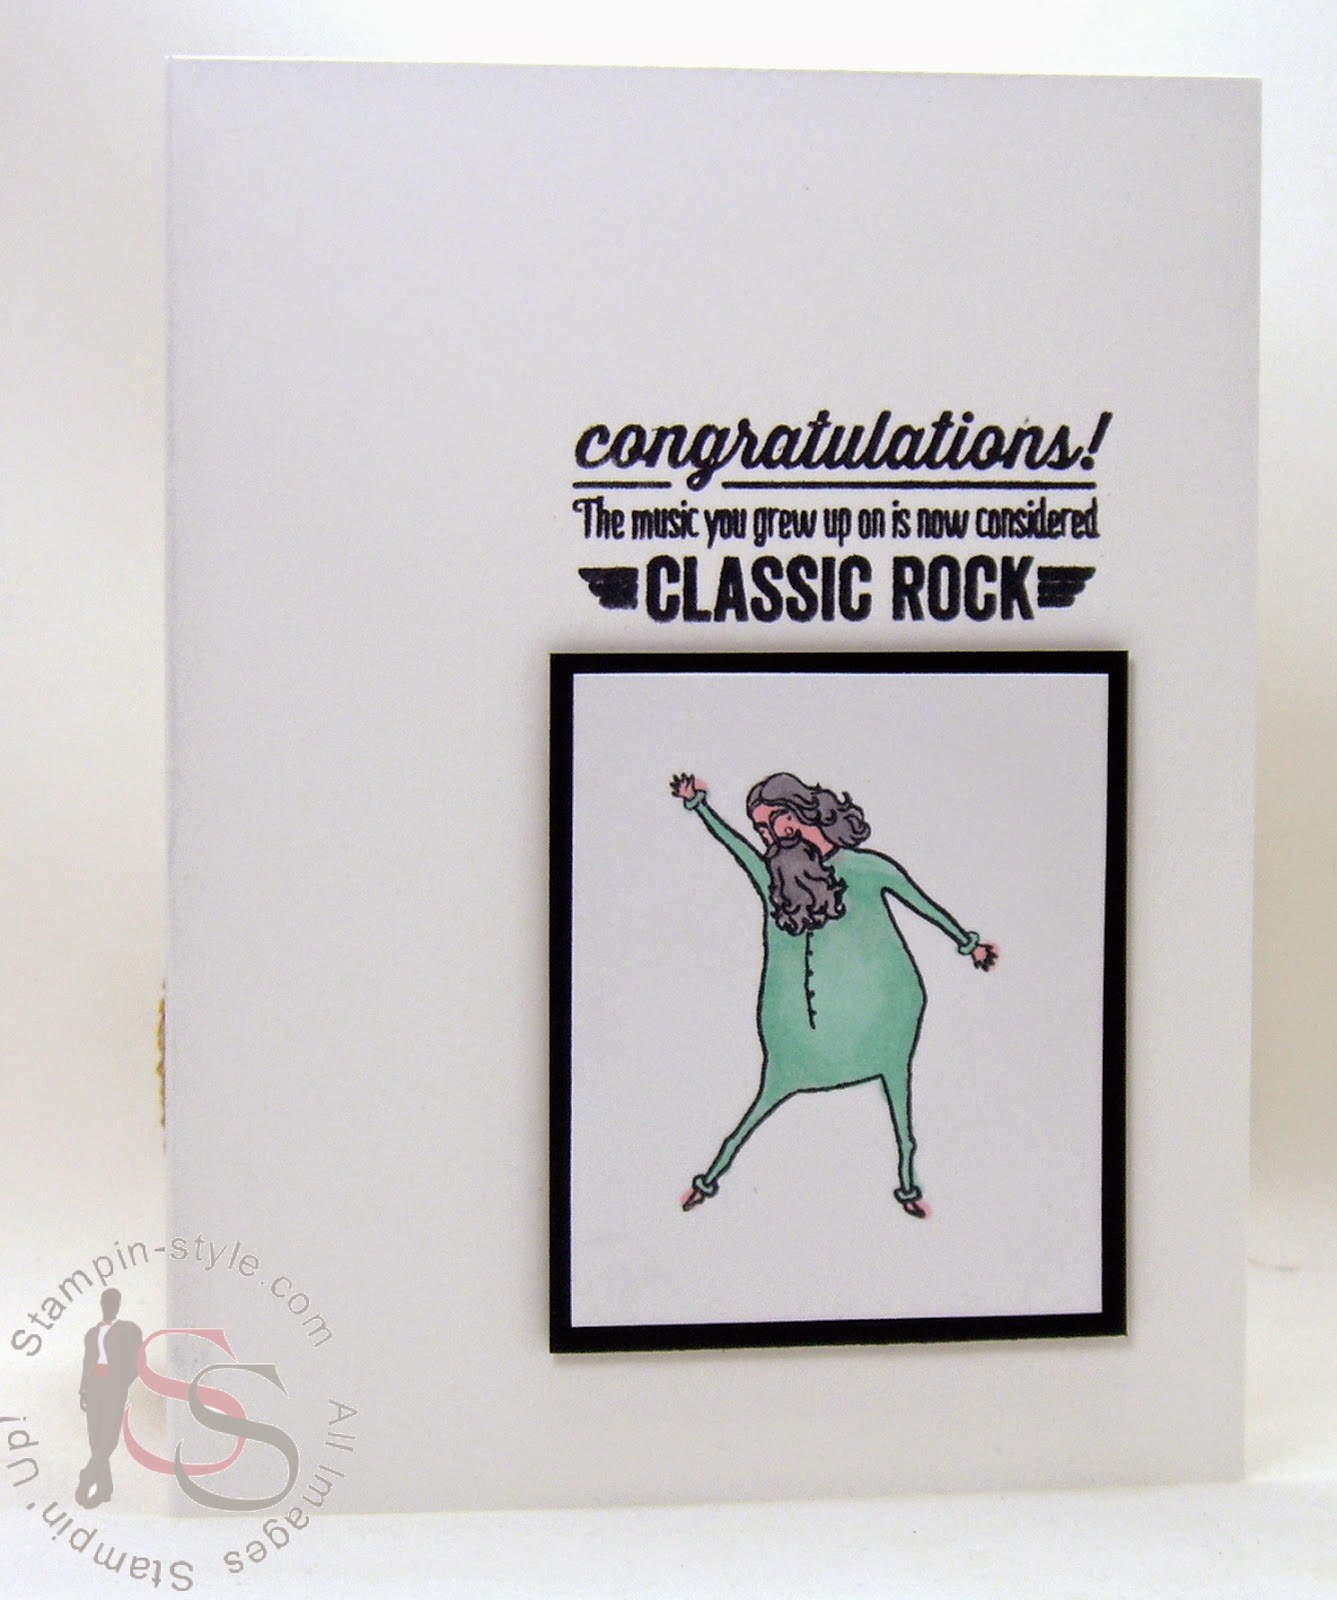 http://stampin-style.typepad.com/stampin-style/2014/09/paper-players-214-classic-rocker.html 